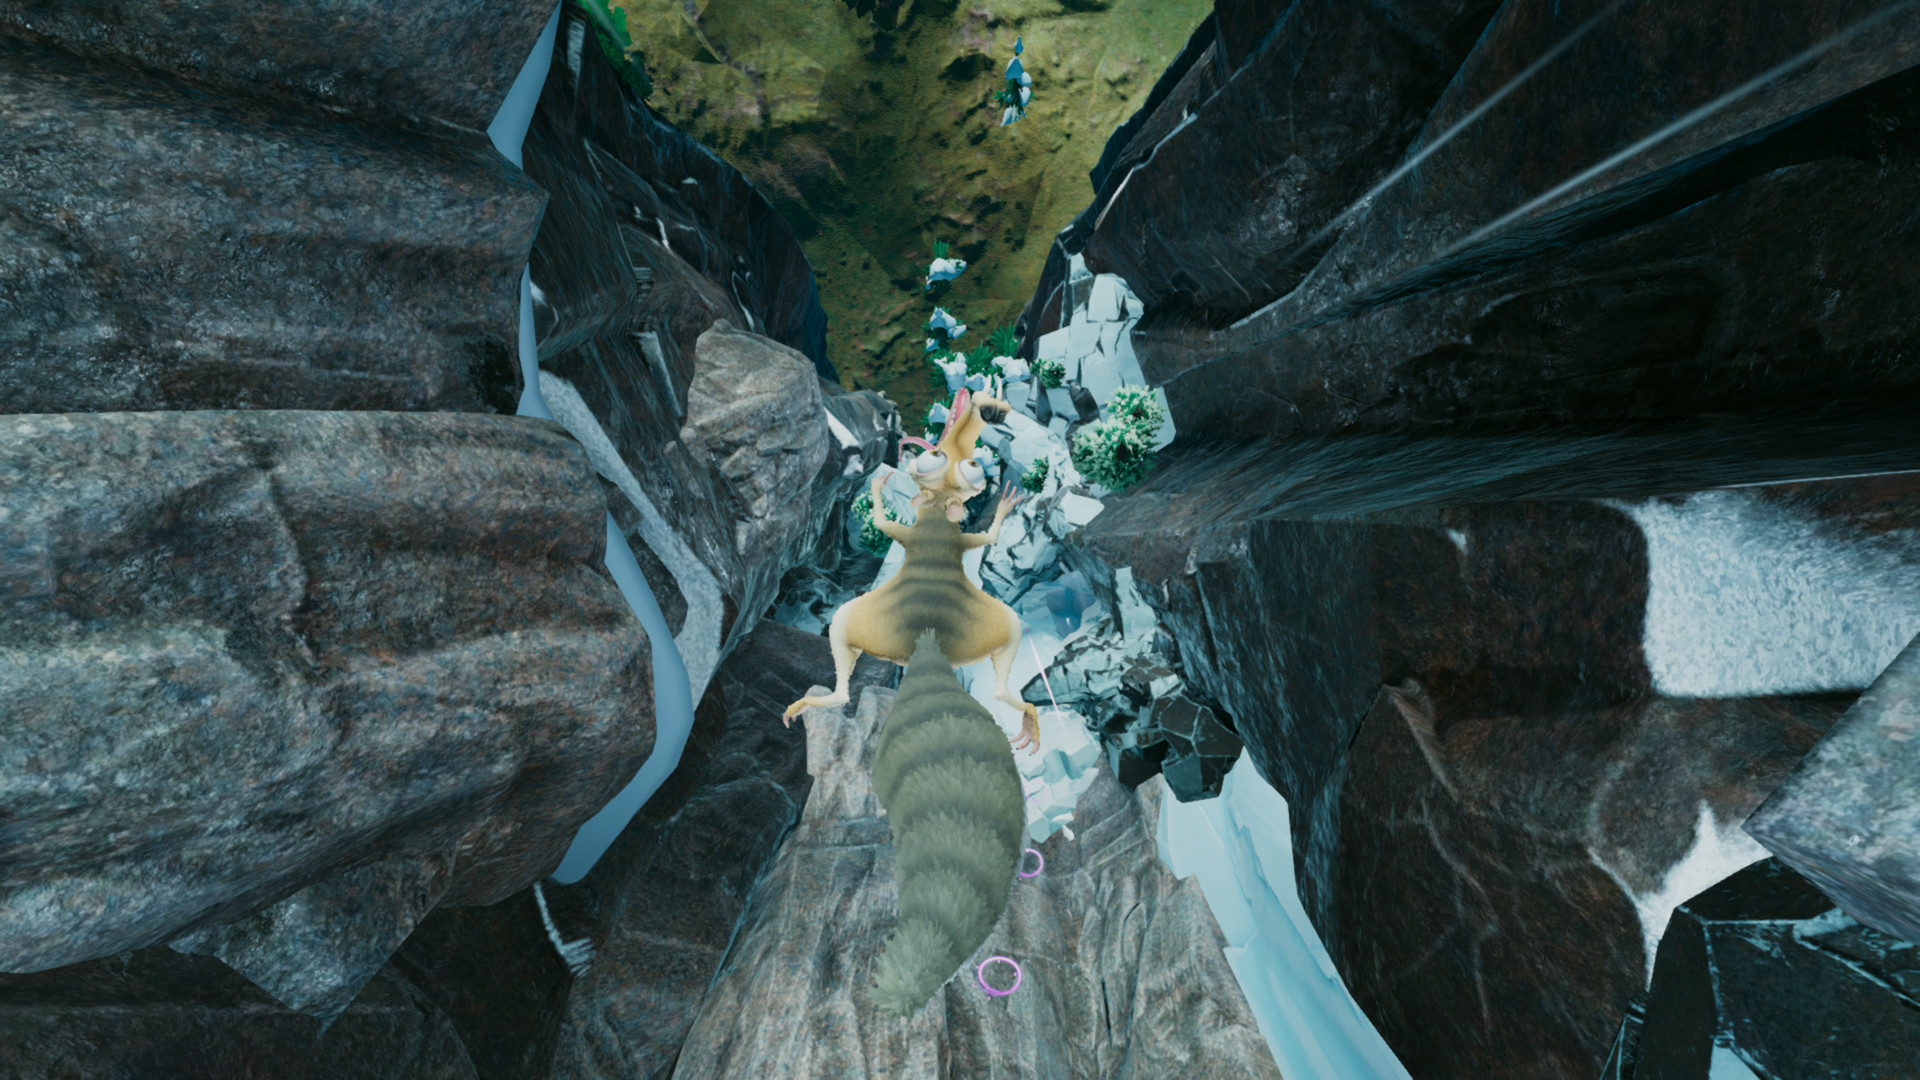 Ice Age Scrat's Nutty Adventure Free Download